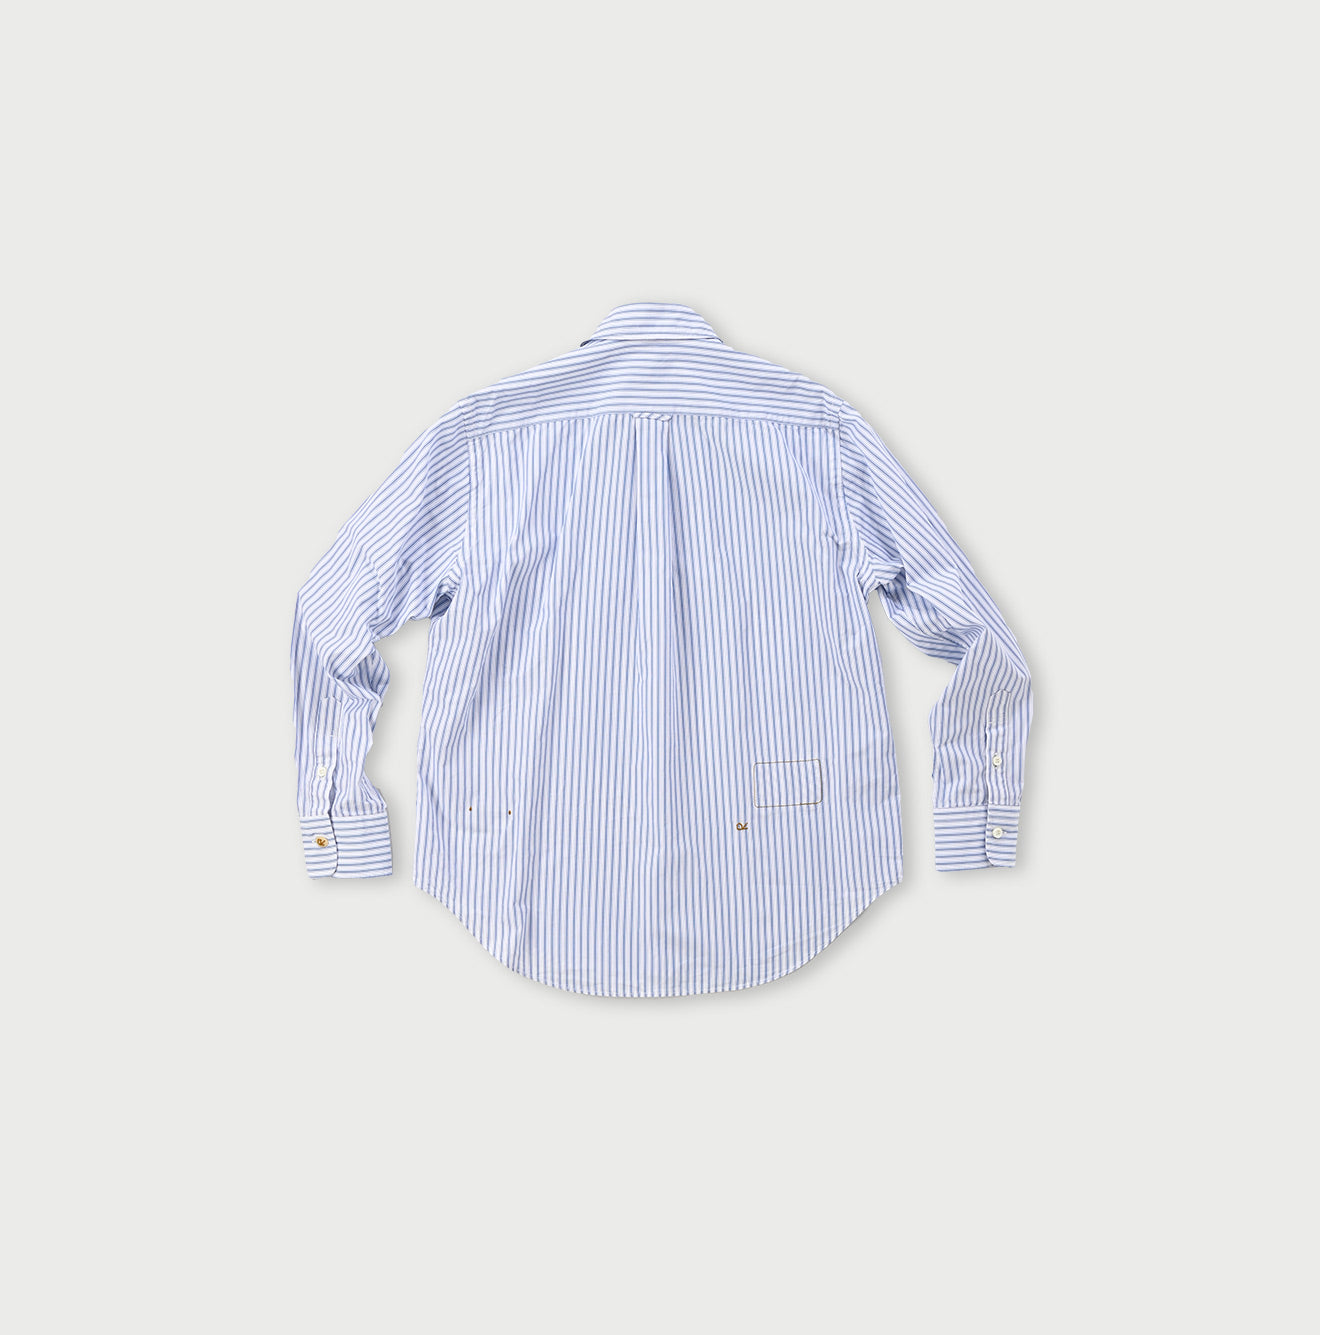 Miko 908 Loafer Shirt